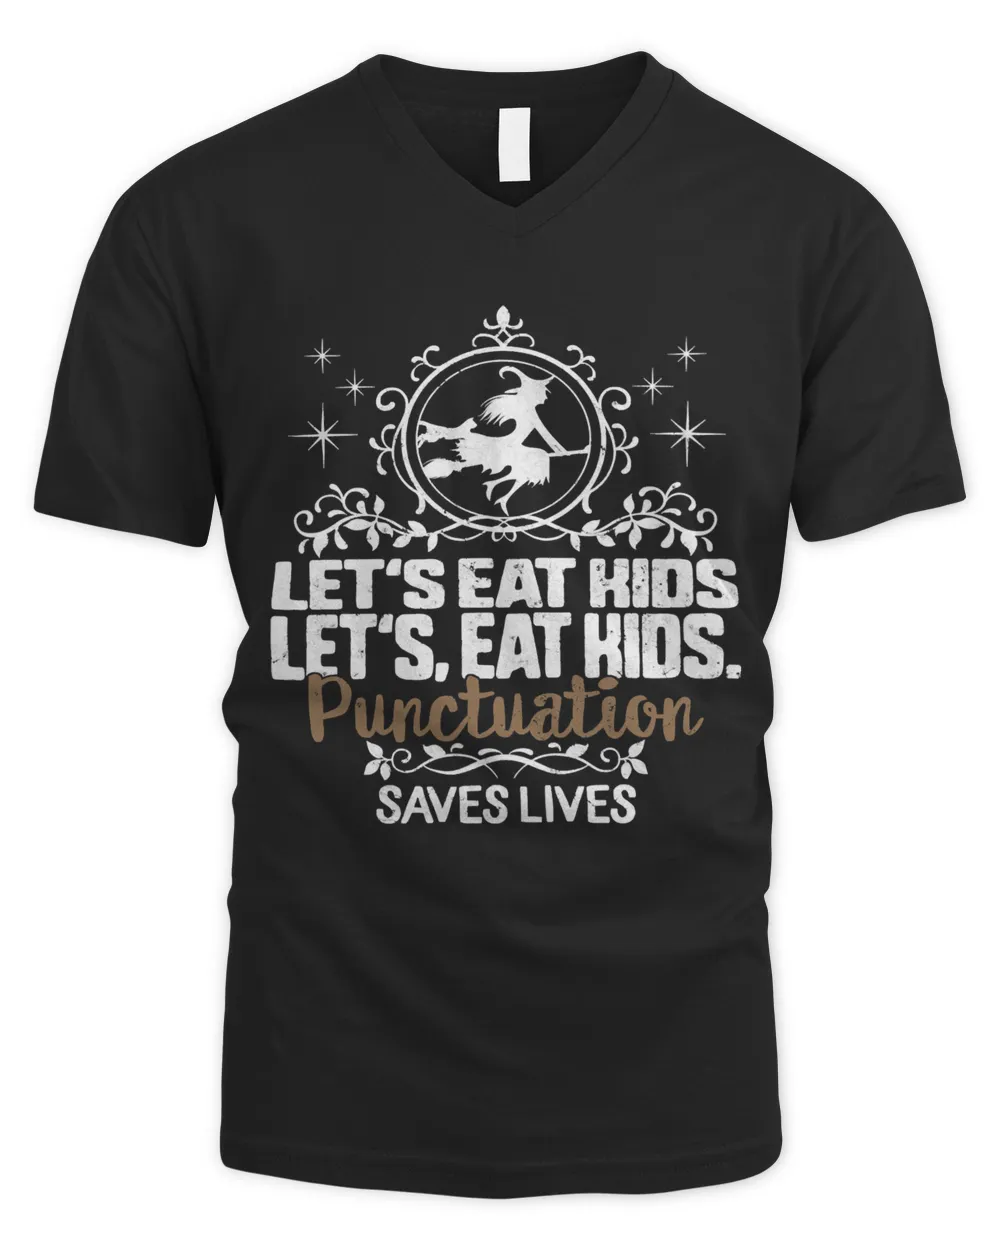 Teacher Halloween English Teacher Punctuation Saves Lives Lets Eat Kids Scary Witch